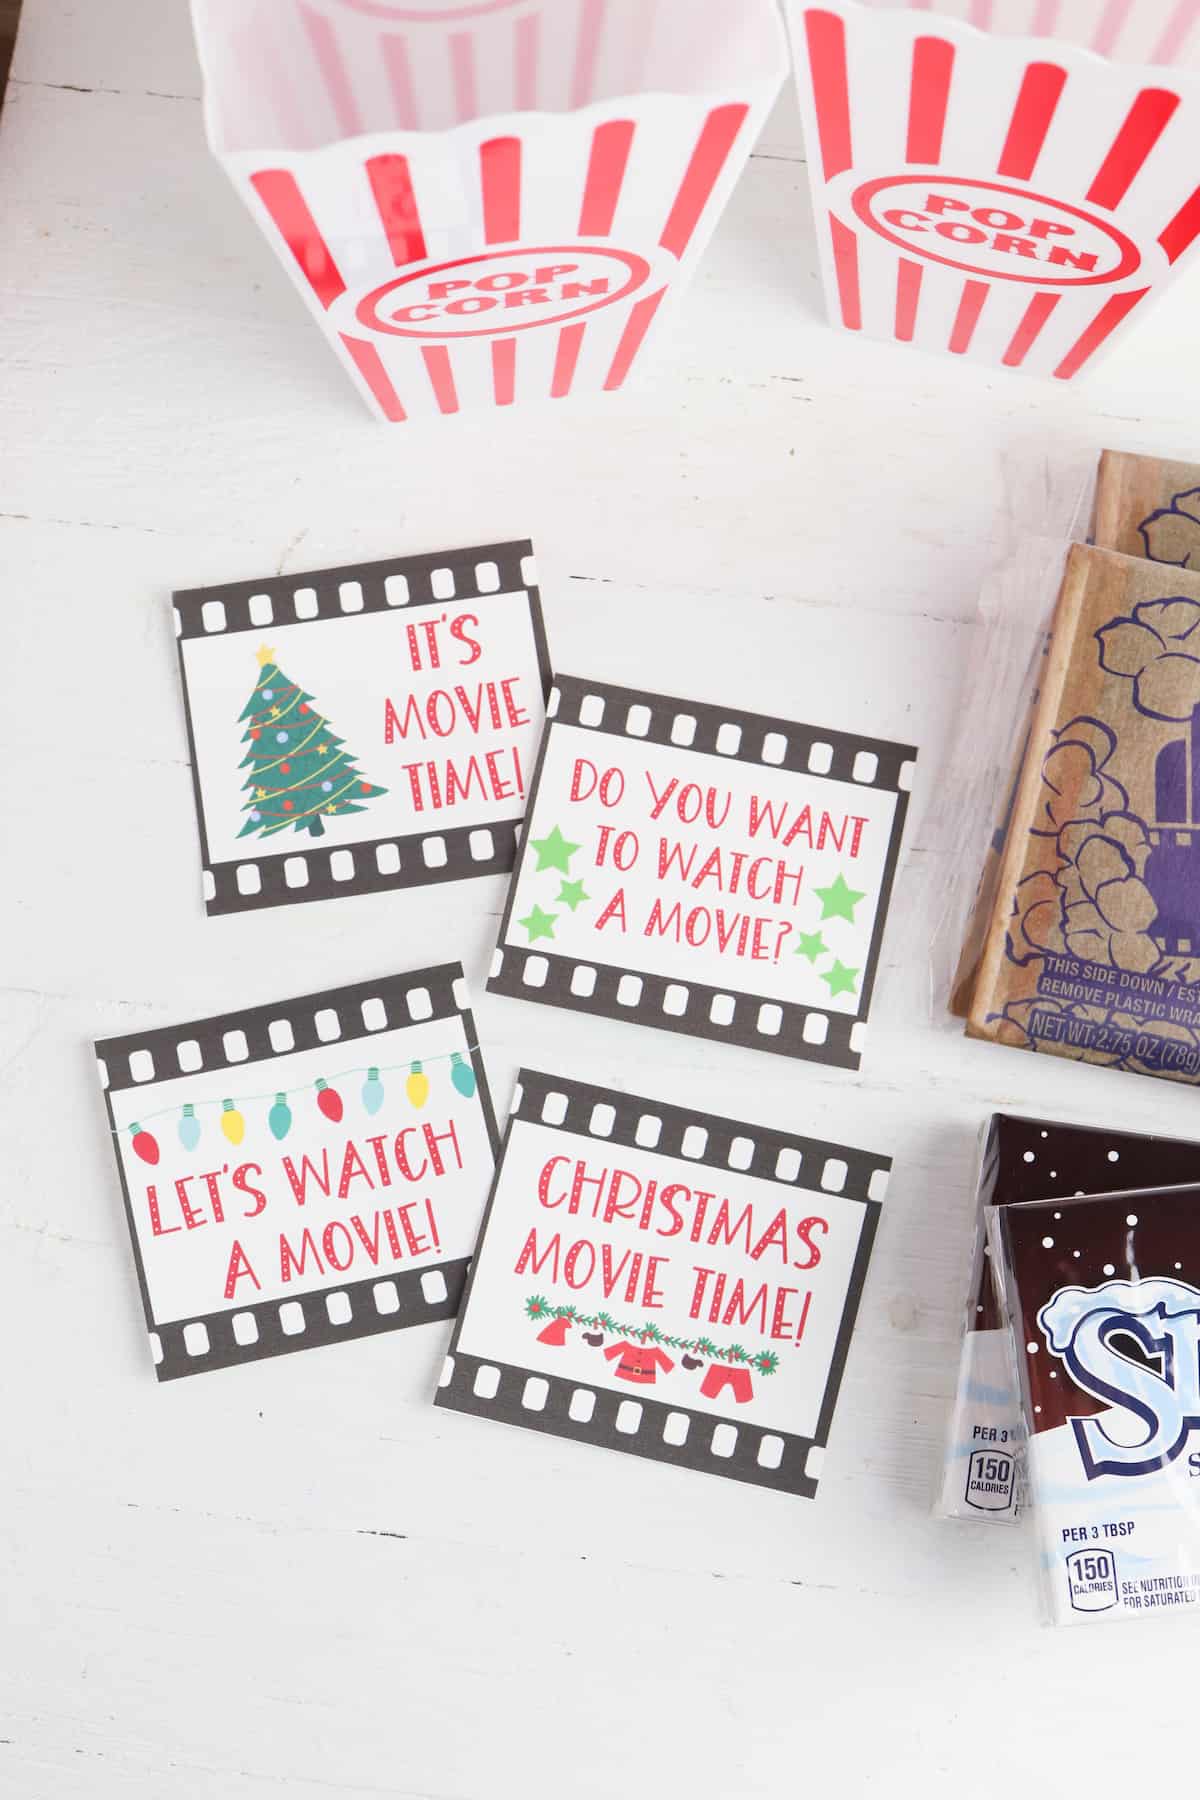 the printable cards, popcorn holders, and snacks